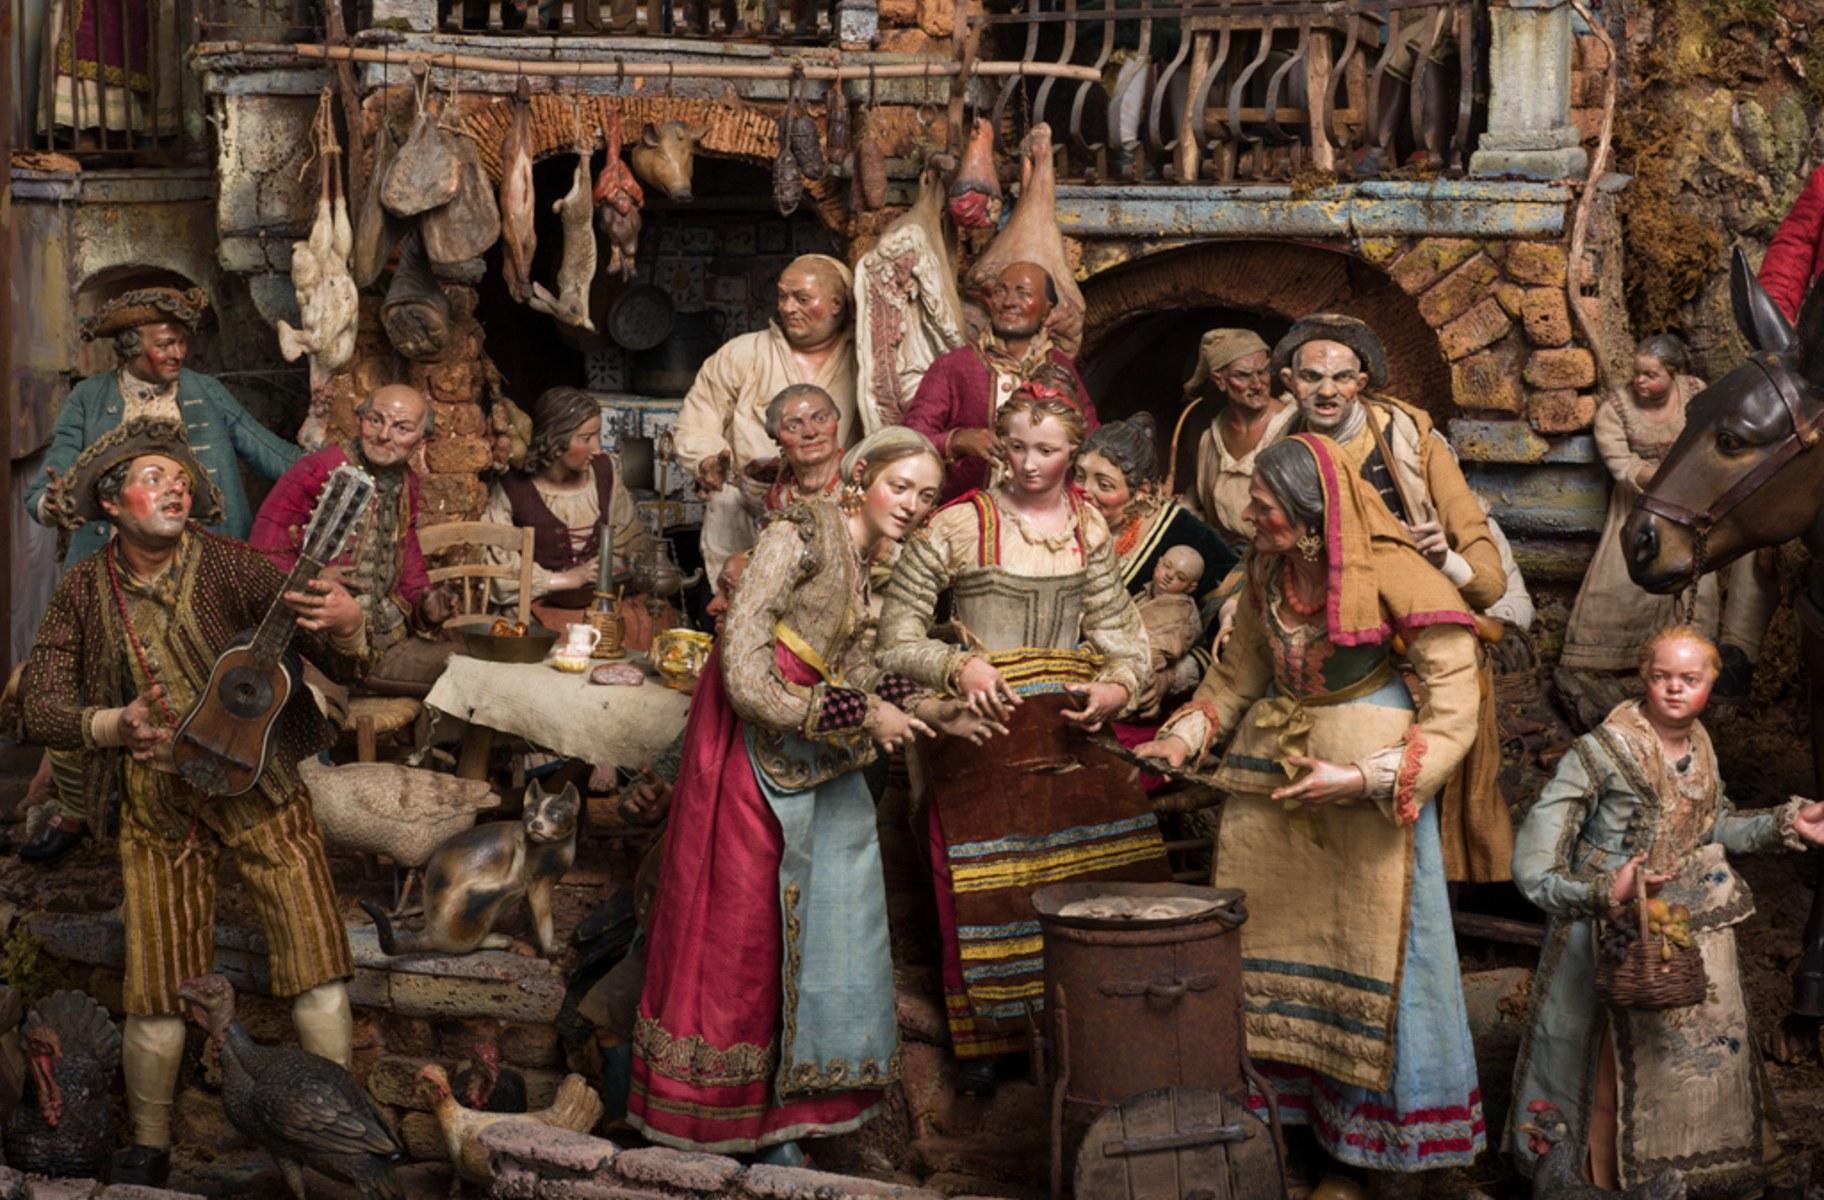 A scene from the Neapolitan crèche at the Art Institute of Chicago. (Courtesy of the Art Institute of Chicago)